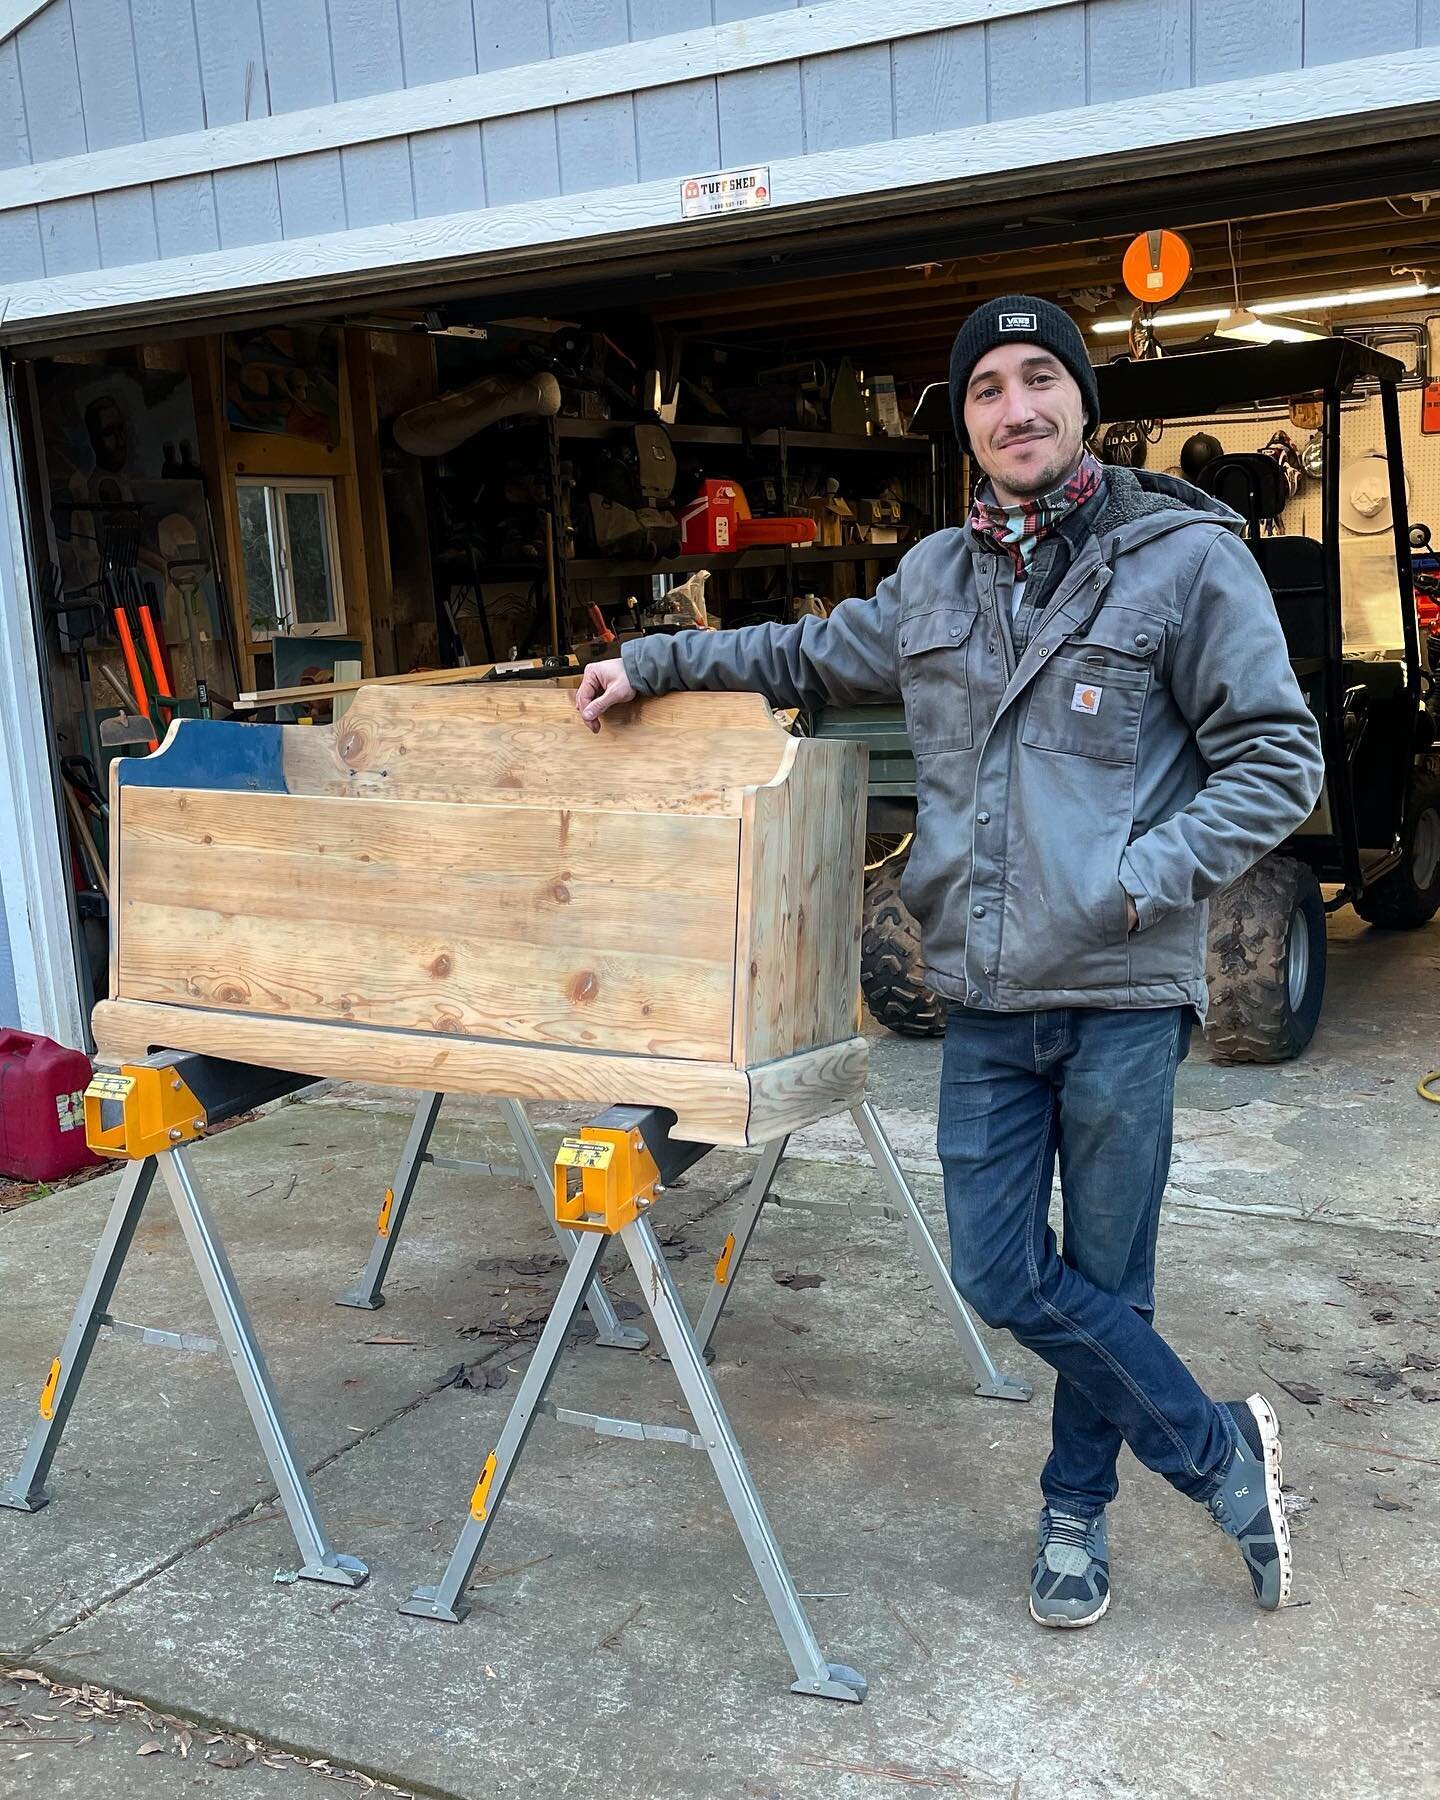 Happy birthday to the best husband and dad to be! 💙 Photo is from the other day when Austin was working on restoring a toy chest that used to be his and has been passed down in his family. 😊
.
.
.
#diy #babyprep